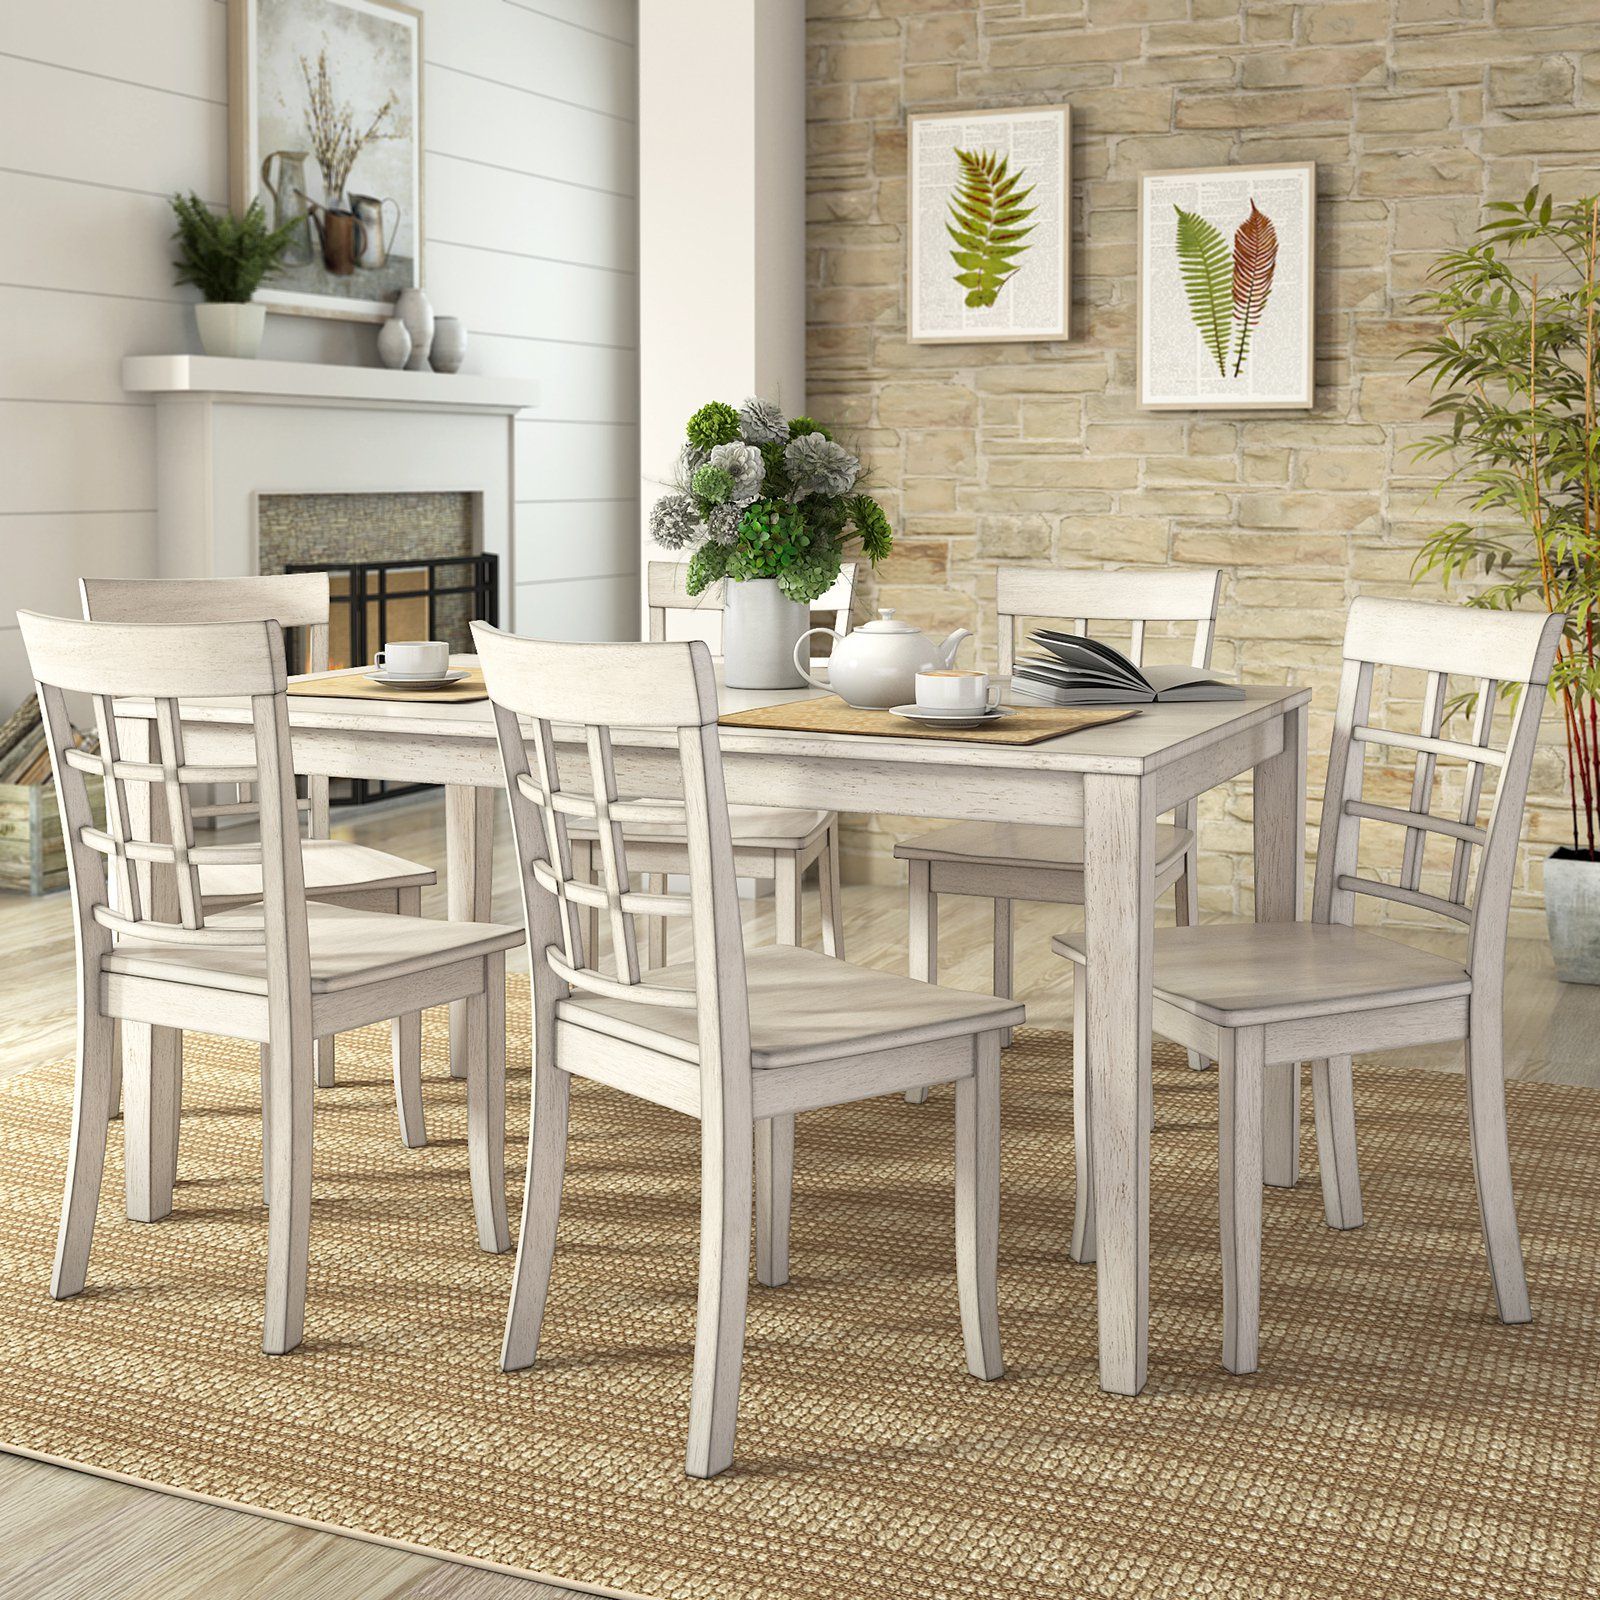 White Wood Soutdoor Seating Sets Throughout Current Lexington Large Wood Dining Set With 6 Window Back Chairs, White (View 13 of 15)